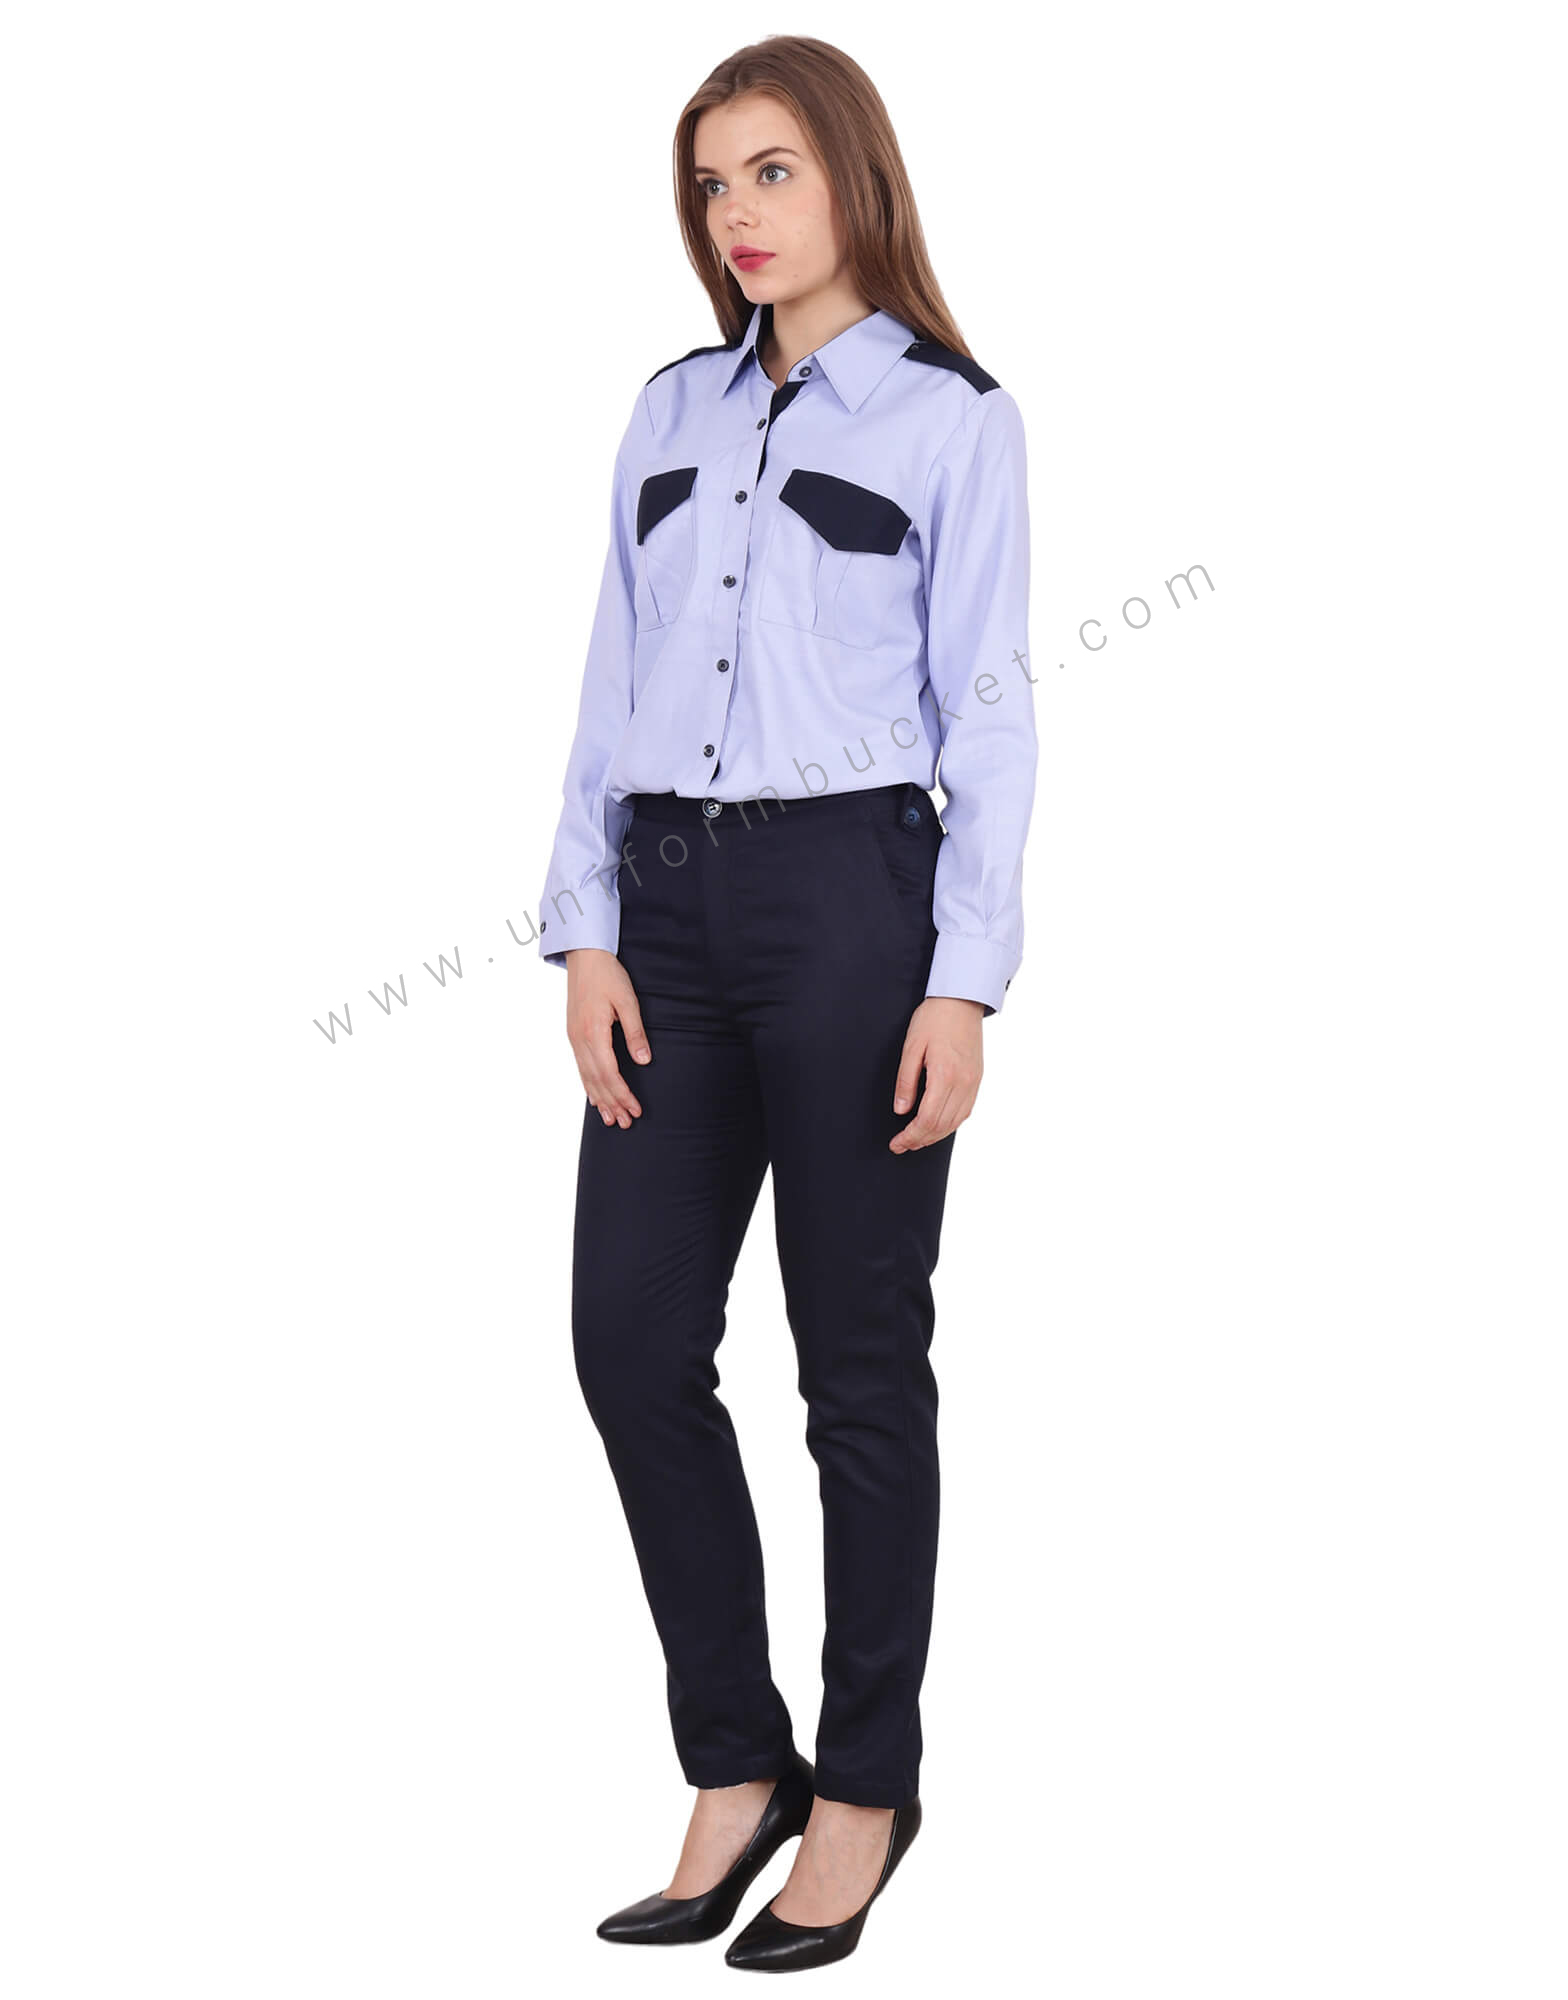 Buy Fitted Navy Blue Trousers For Female Online  Best Prices in India   Uniform Bucket  UNIFORM BUCKET